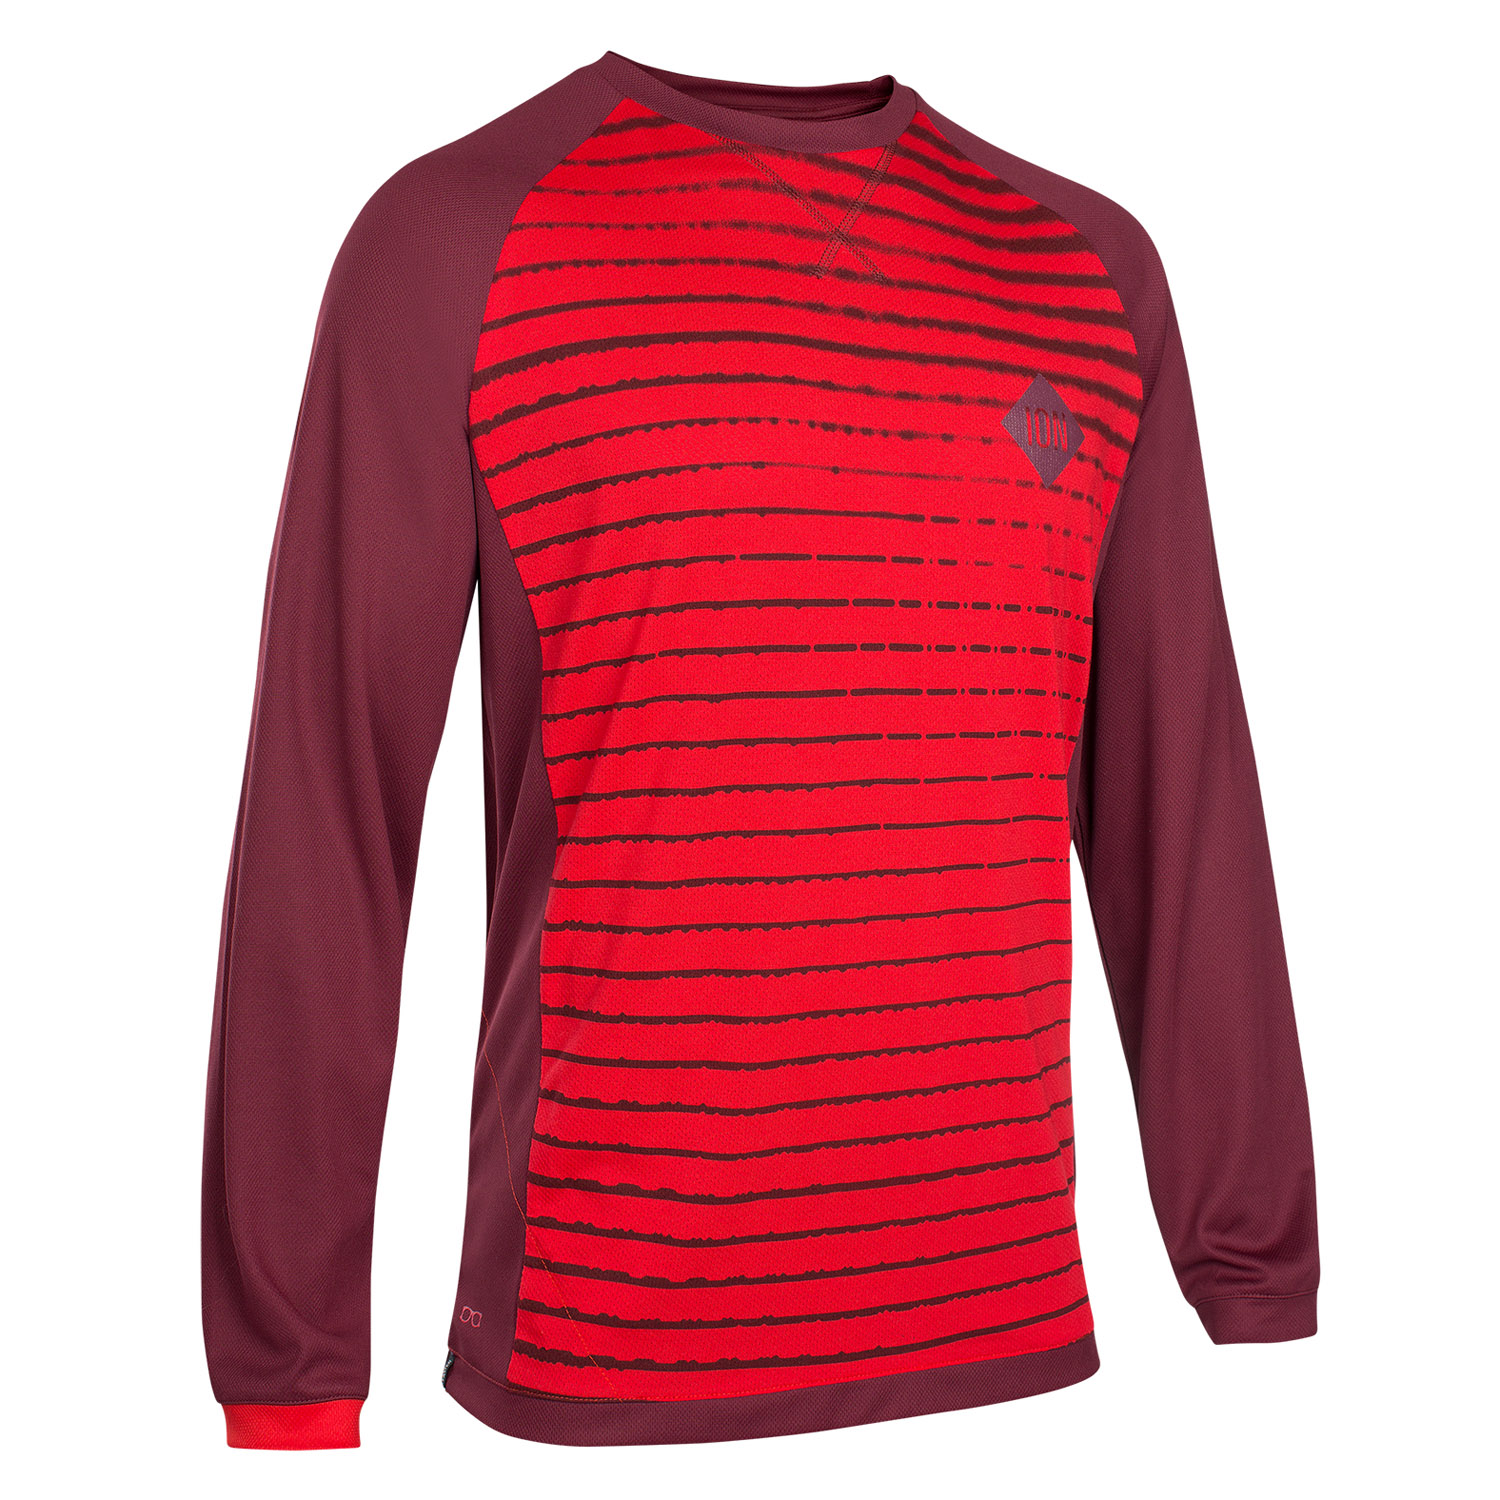 ION Freeride Jersey Scrub Amp Combat Red